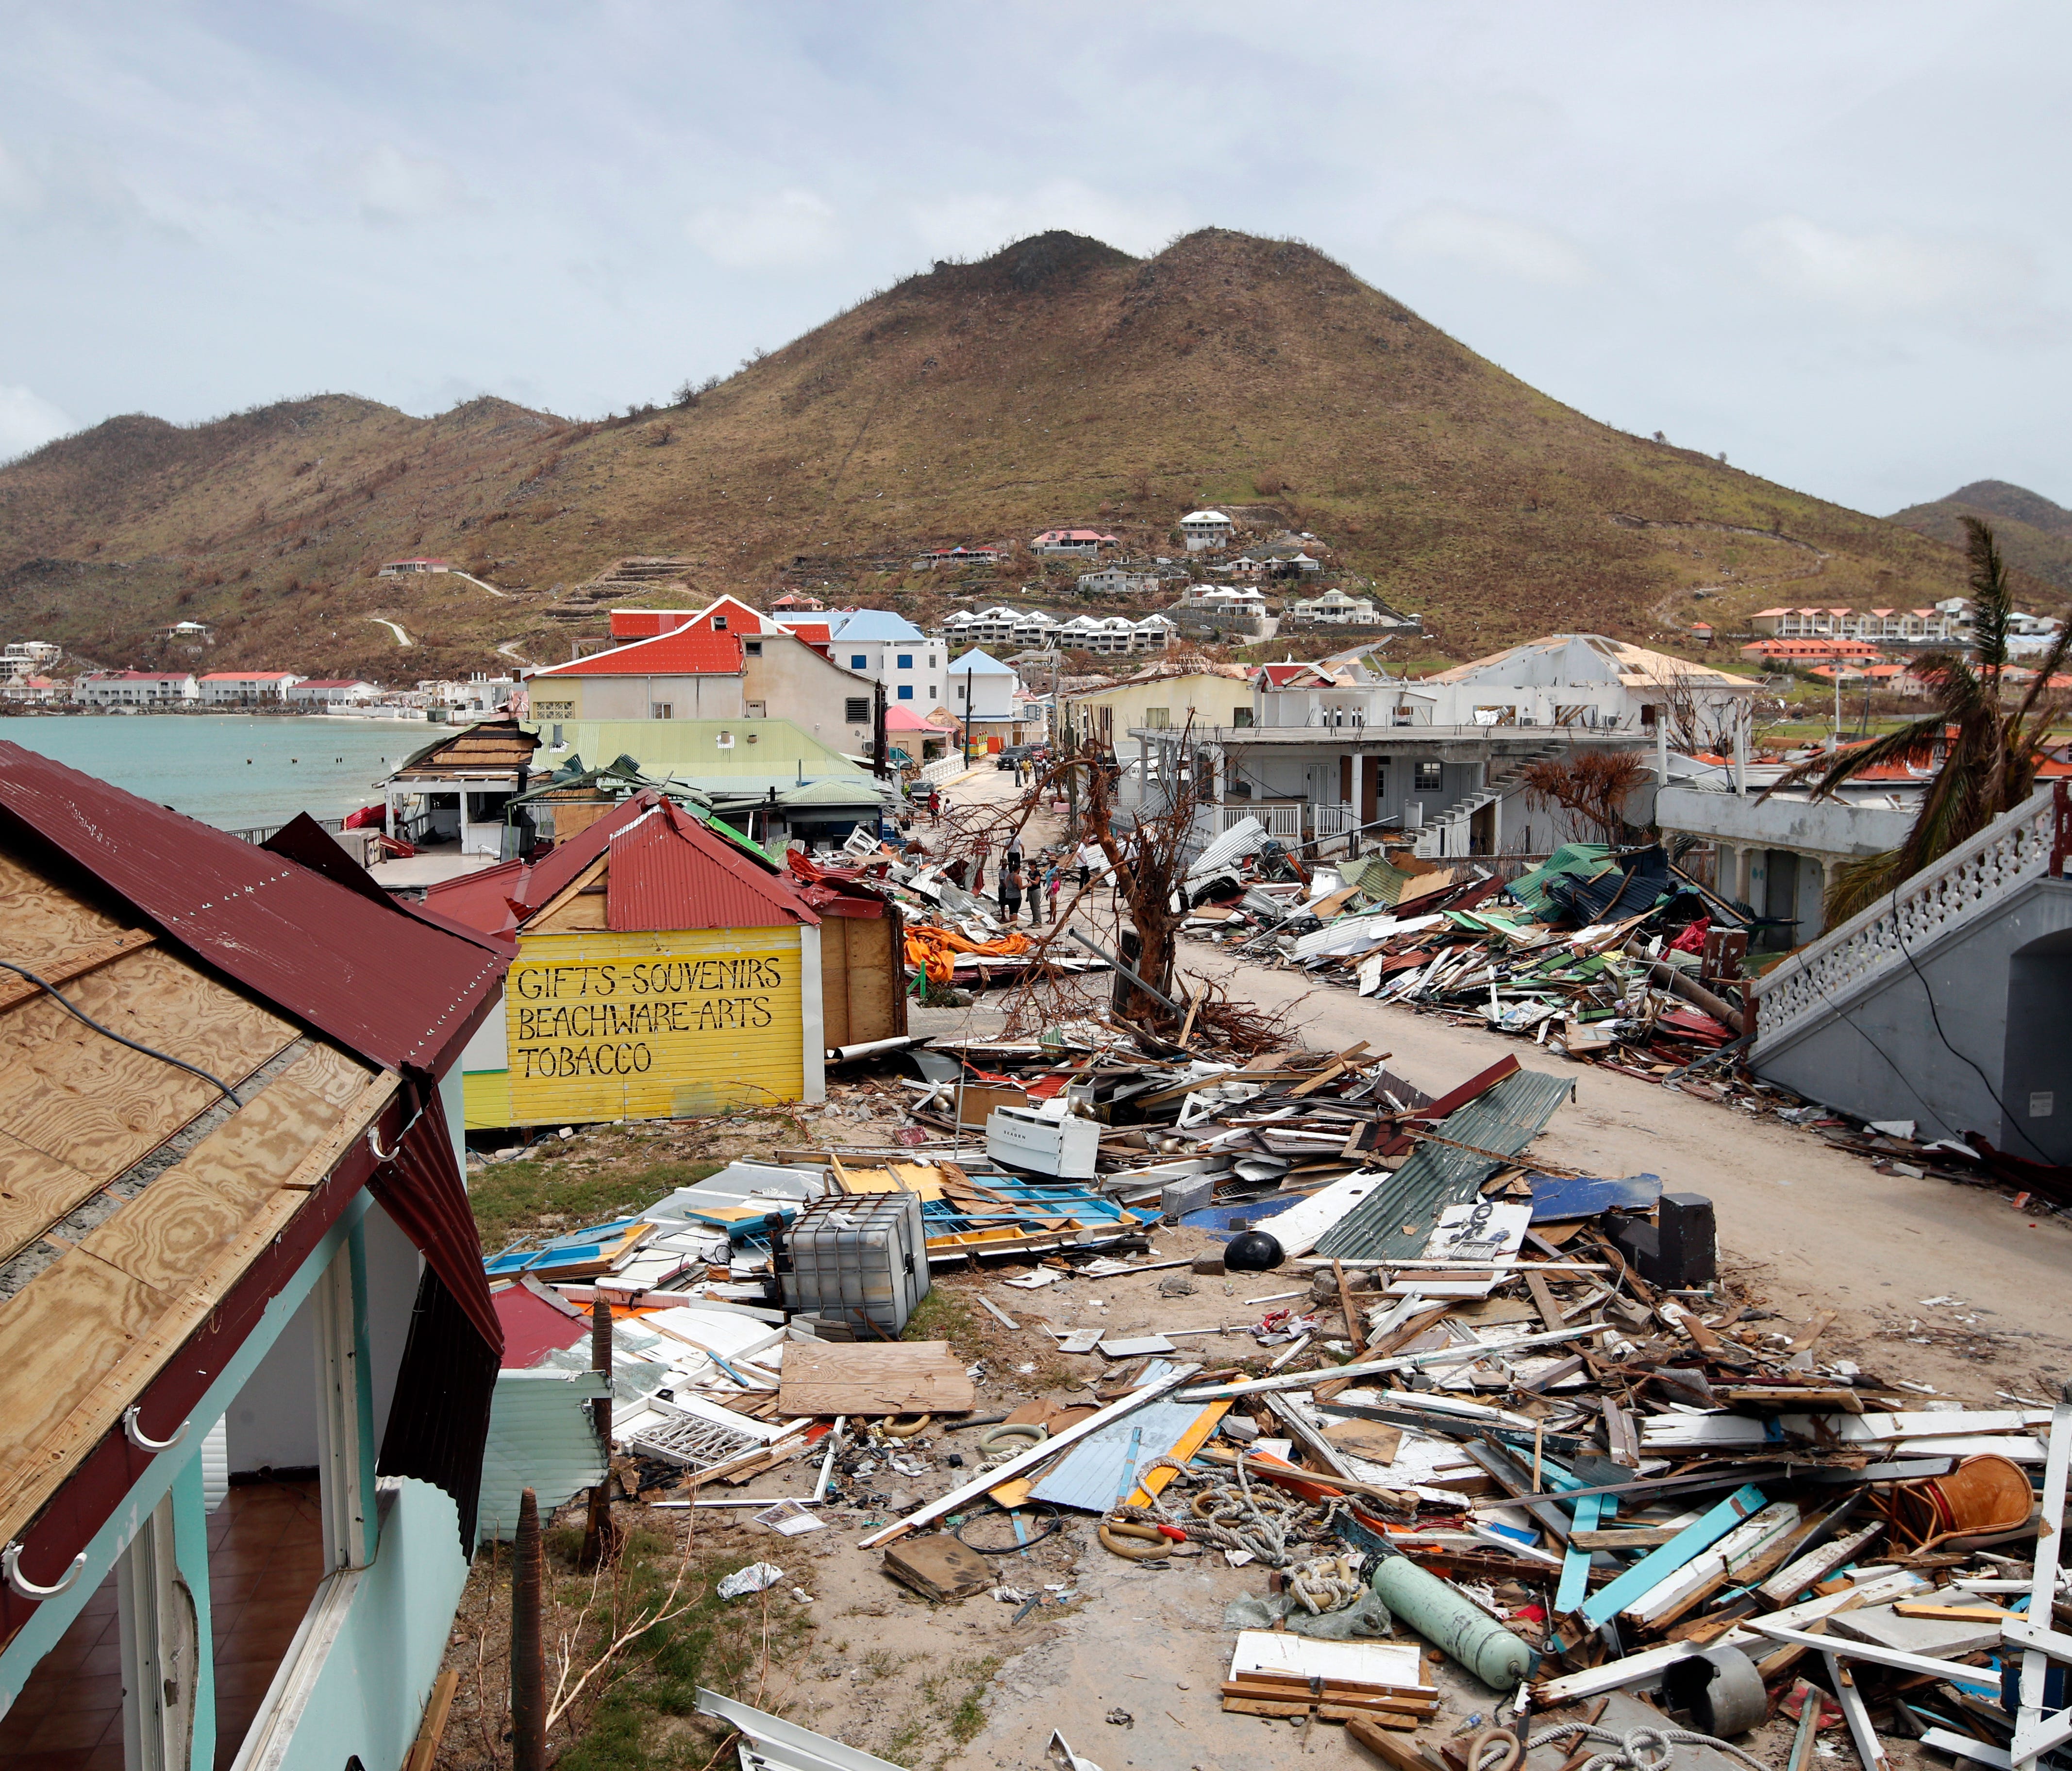 View of buildings destroyed by Hurricane Irma during the visit of French  President Emmanuel Macron in the Caribbean island of St. Martin on Sept. 12, 2017.